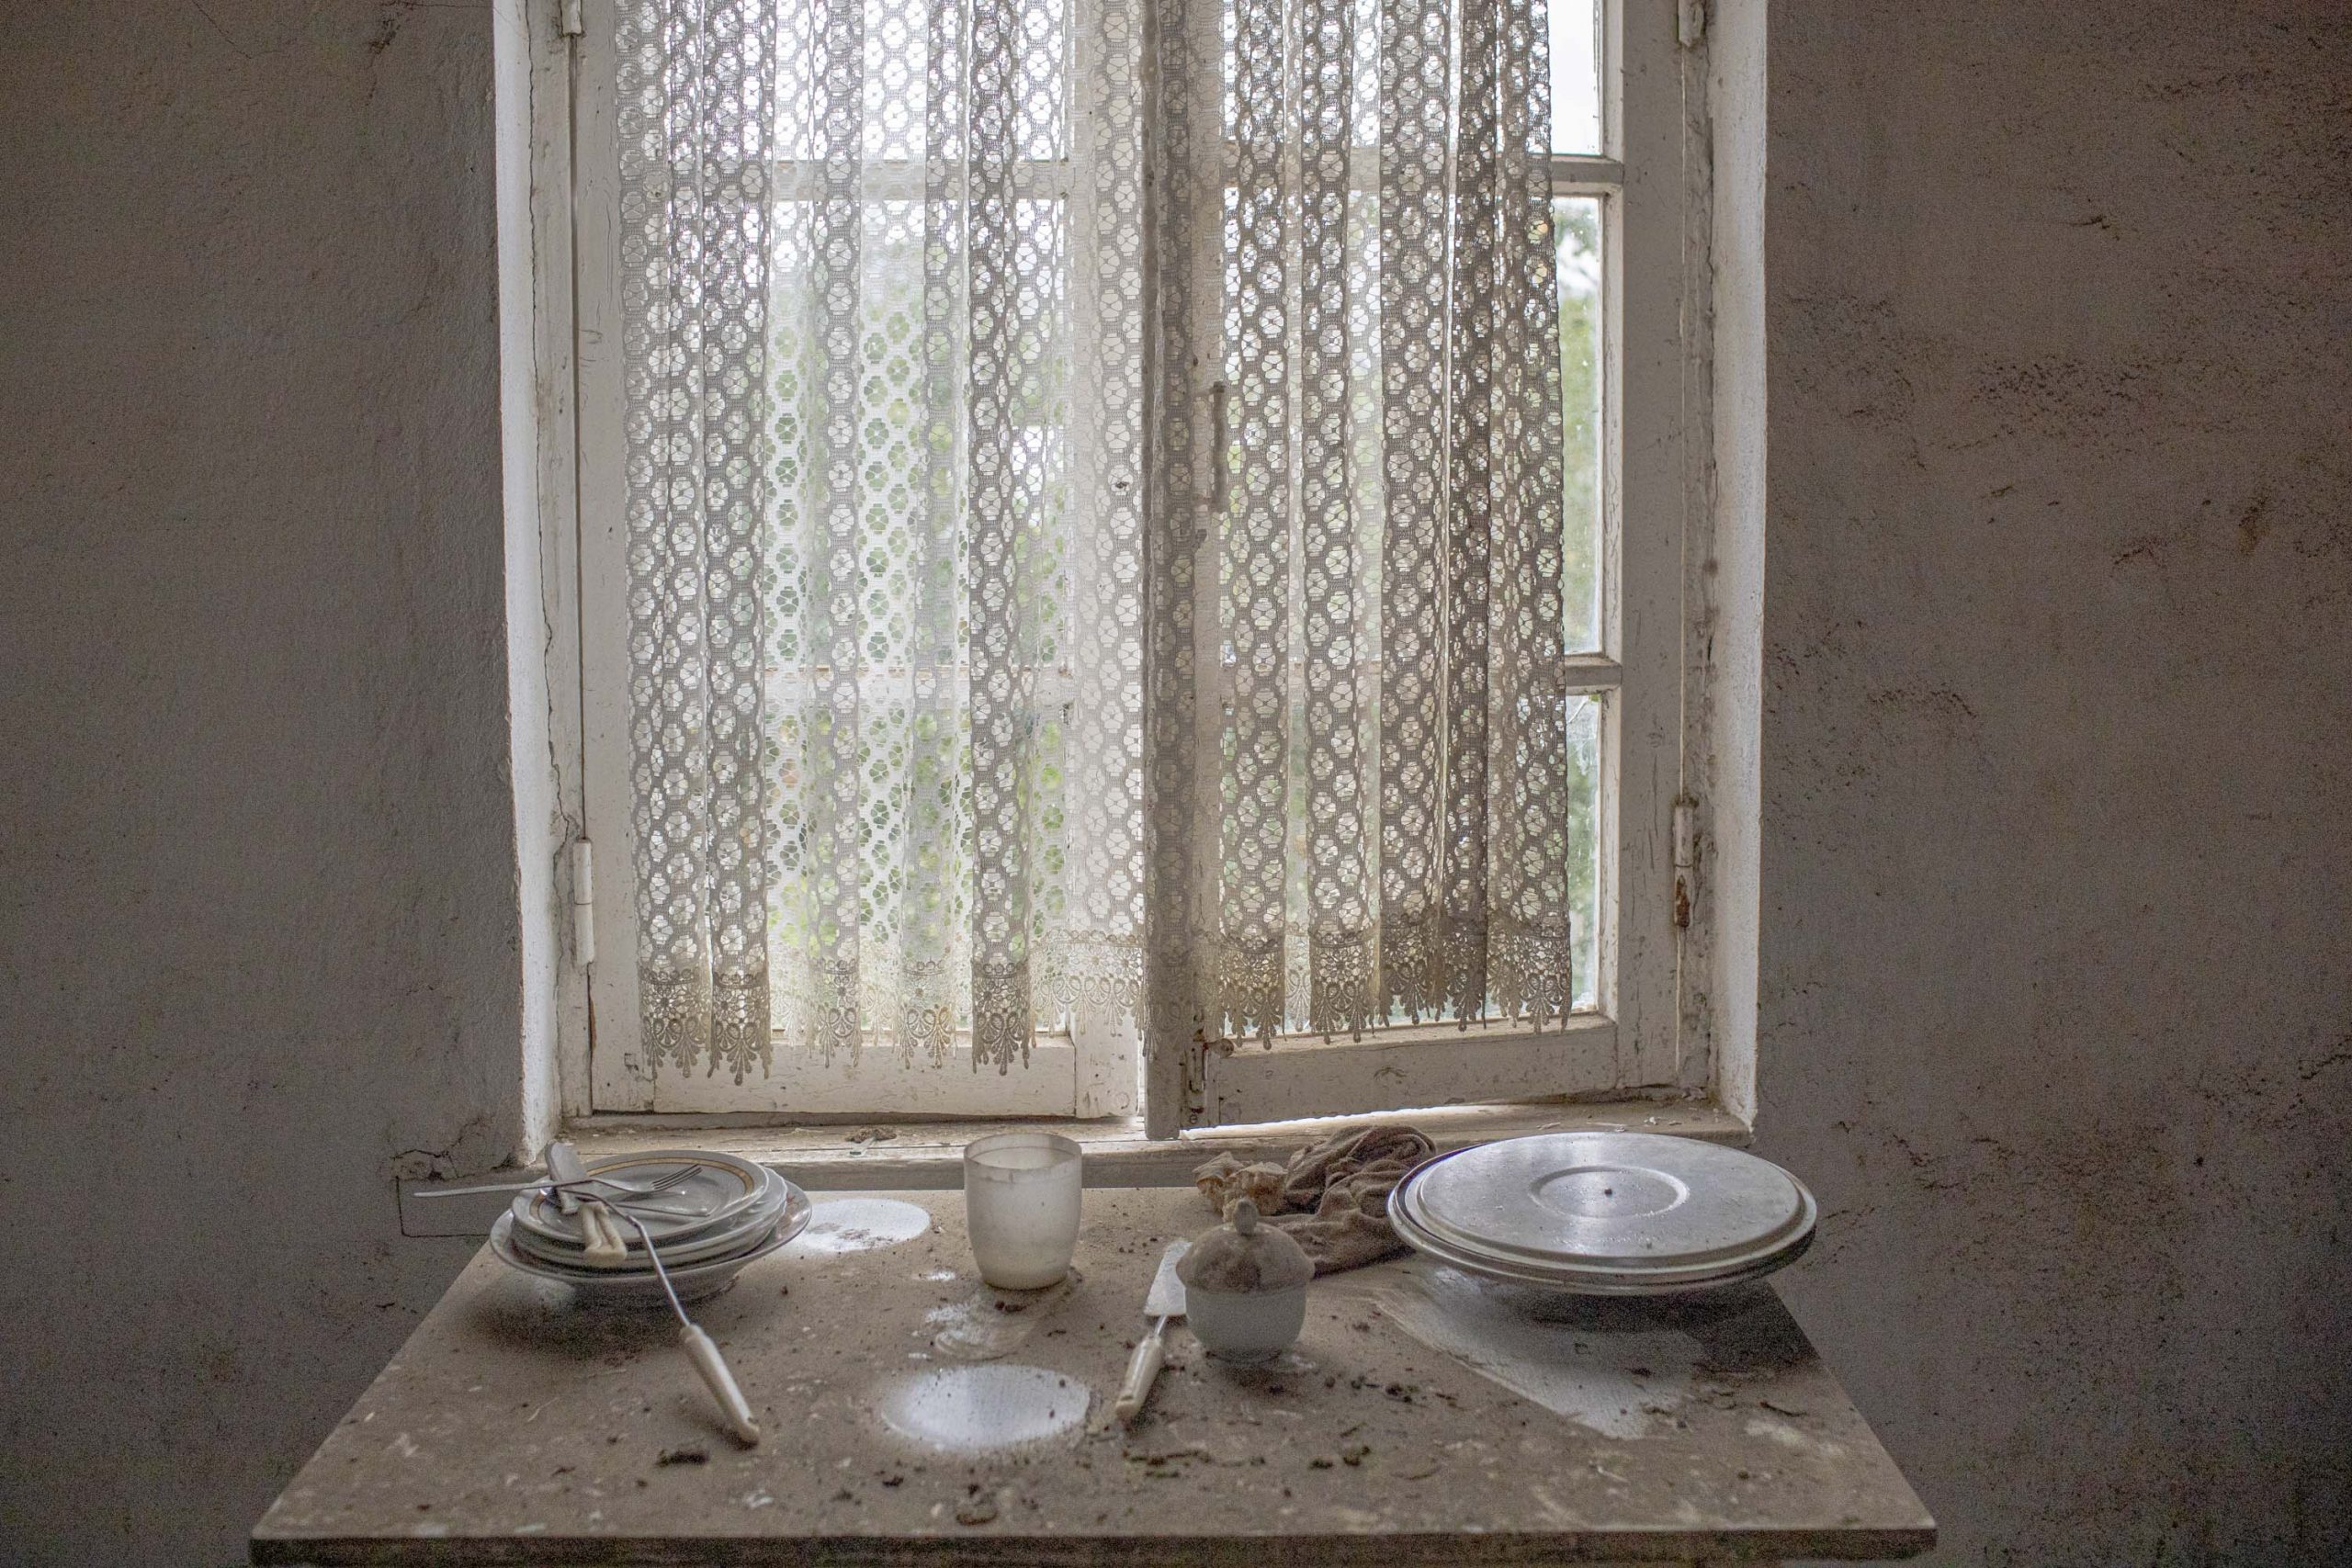 Kitchen in a house that was hit in Martuni, Nagorno-Karabakh, seen on October 1, 2020. The house was hit on September 27.